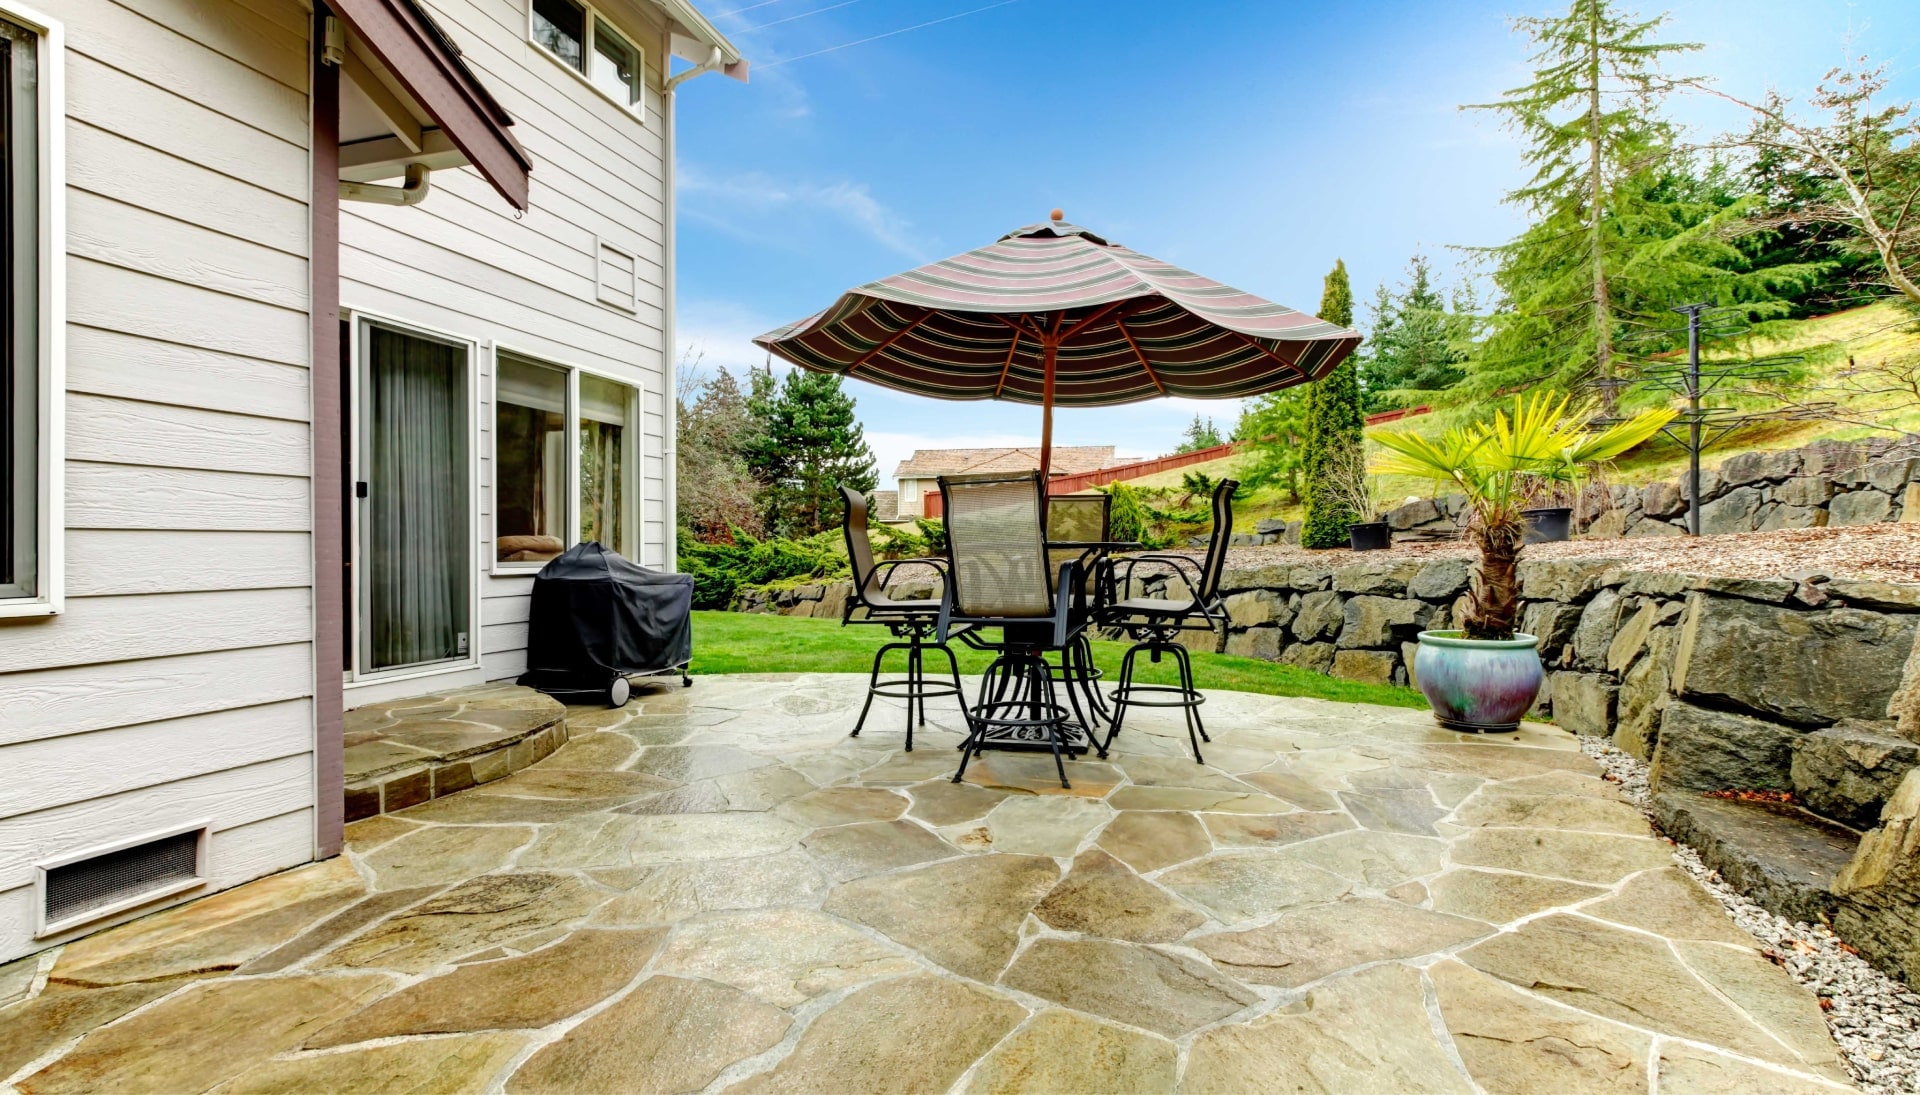 Beautifully Textured and Patterned Concrete Patios in Duluth, Minnesota area!